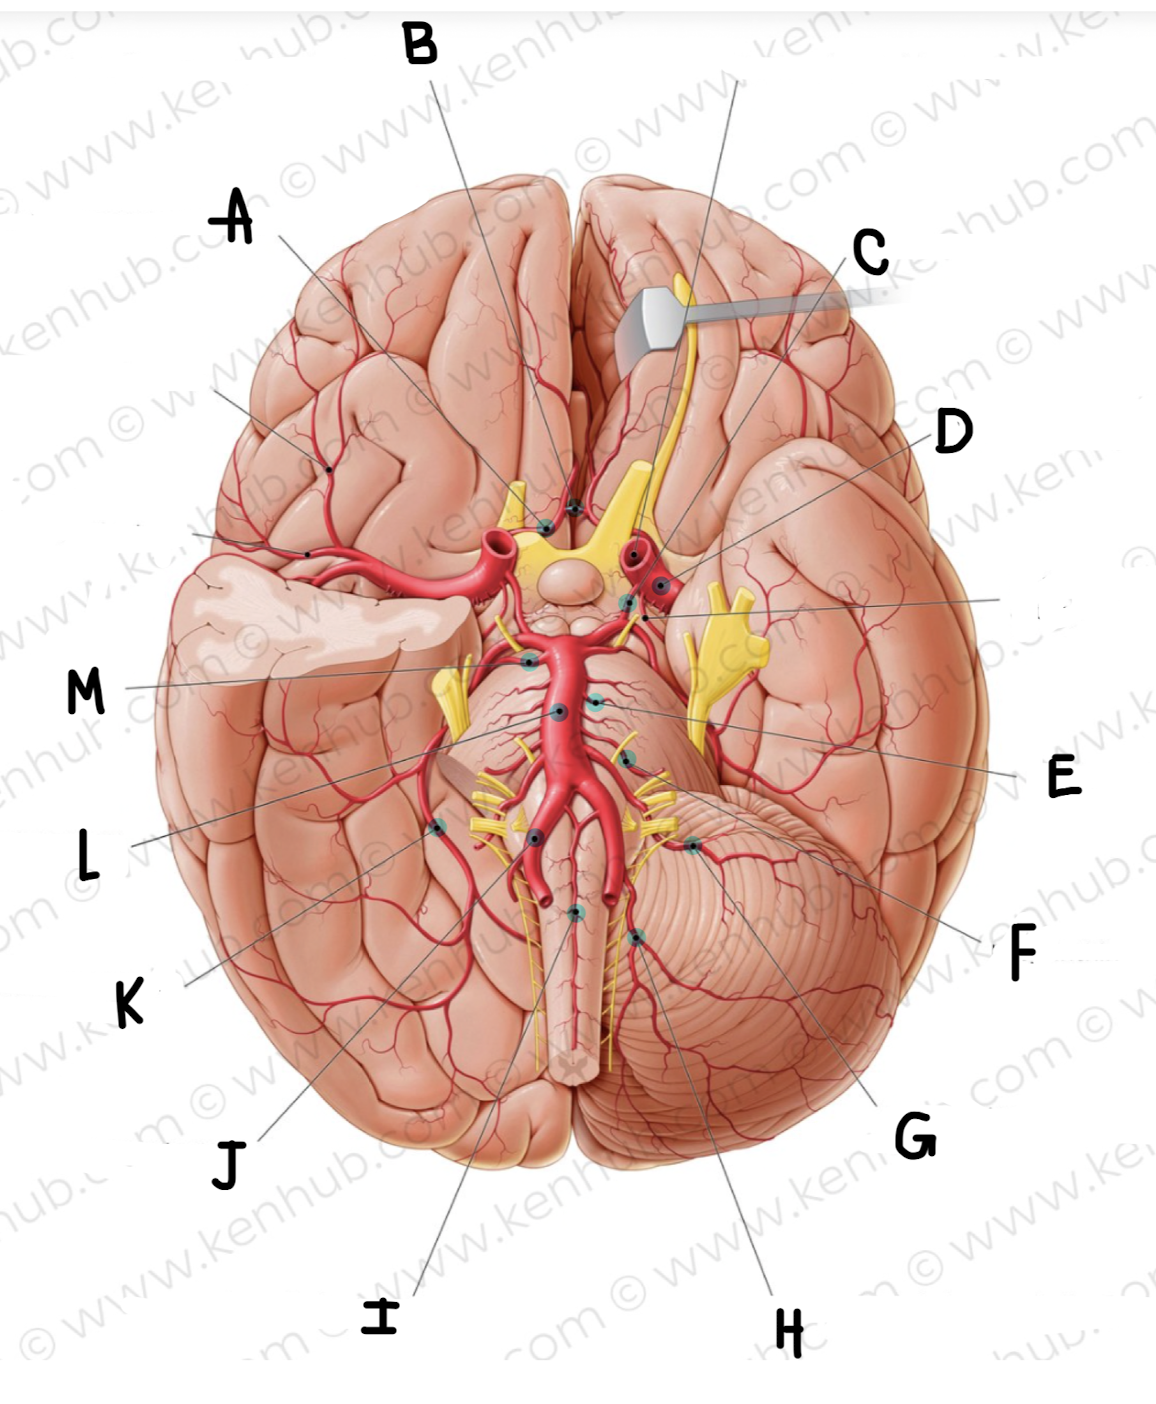 <p>What is the name of the artery labeled J?</p>